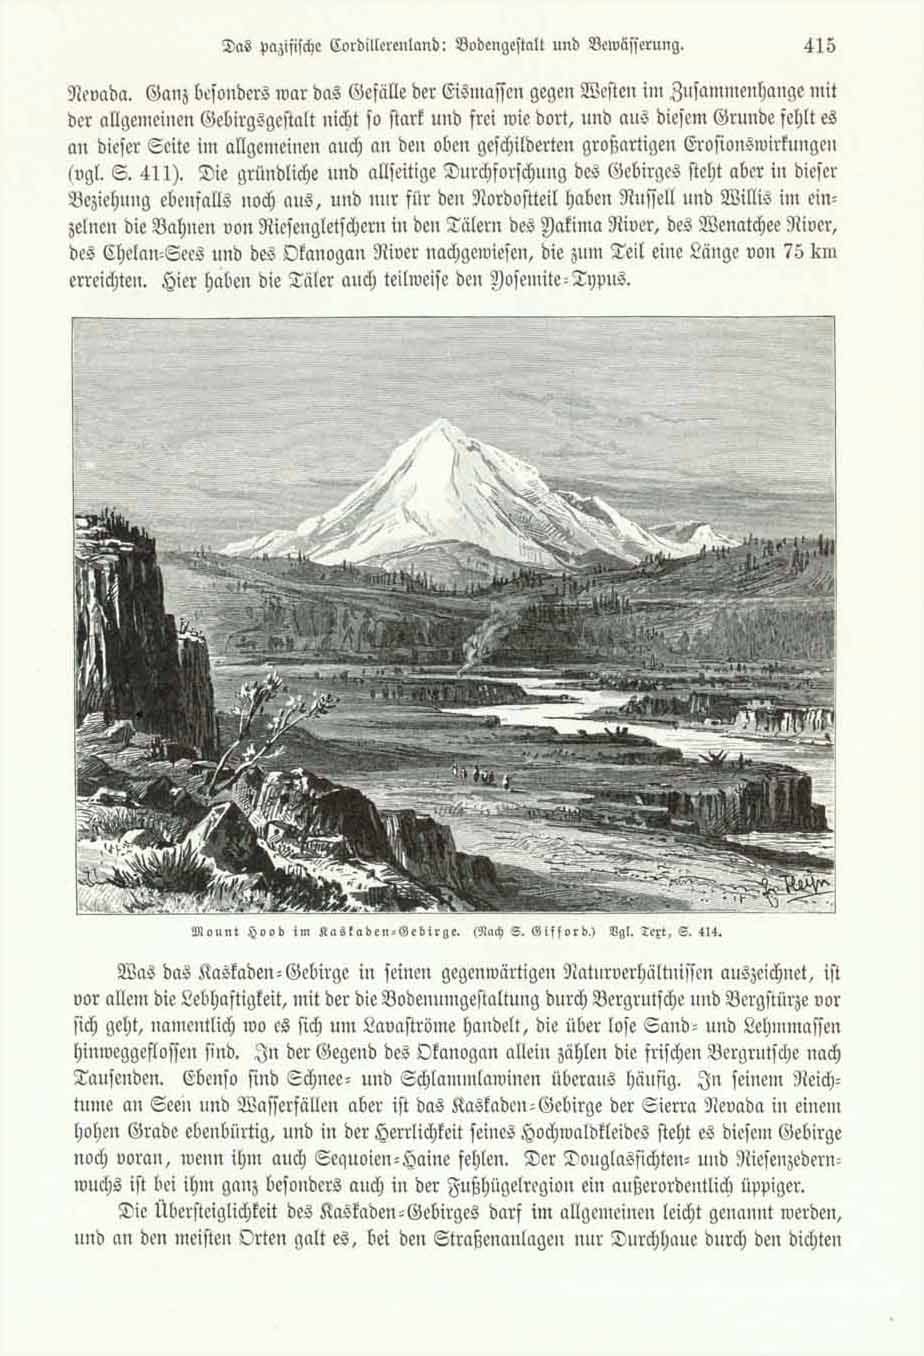 Landscapes, USA, Mount Hood, Cascades, "Mount Hood im Kaskaden-Gebirge"  Wood engraving after Gifford 1904. Text about the  Pacific Northwest continues on reverse side.  Original antique print , interior design, wall decoration, ideas, idea, gift ideas, present, vintage, charming, special, decoration, home interior, living room design